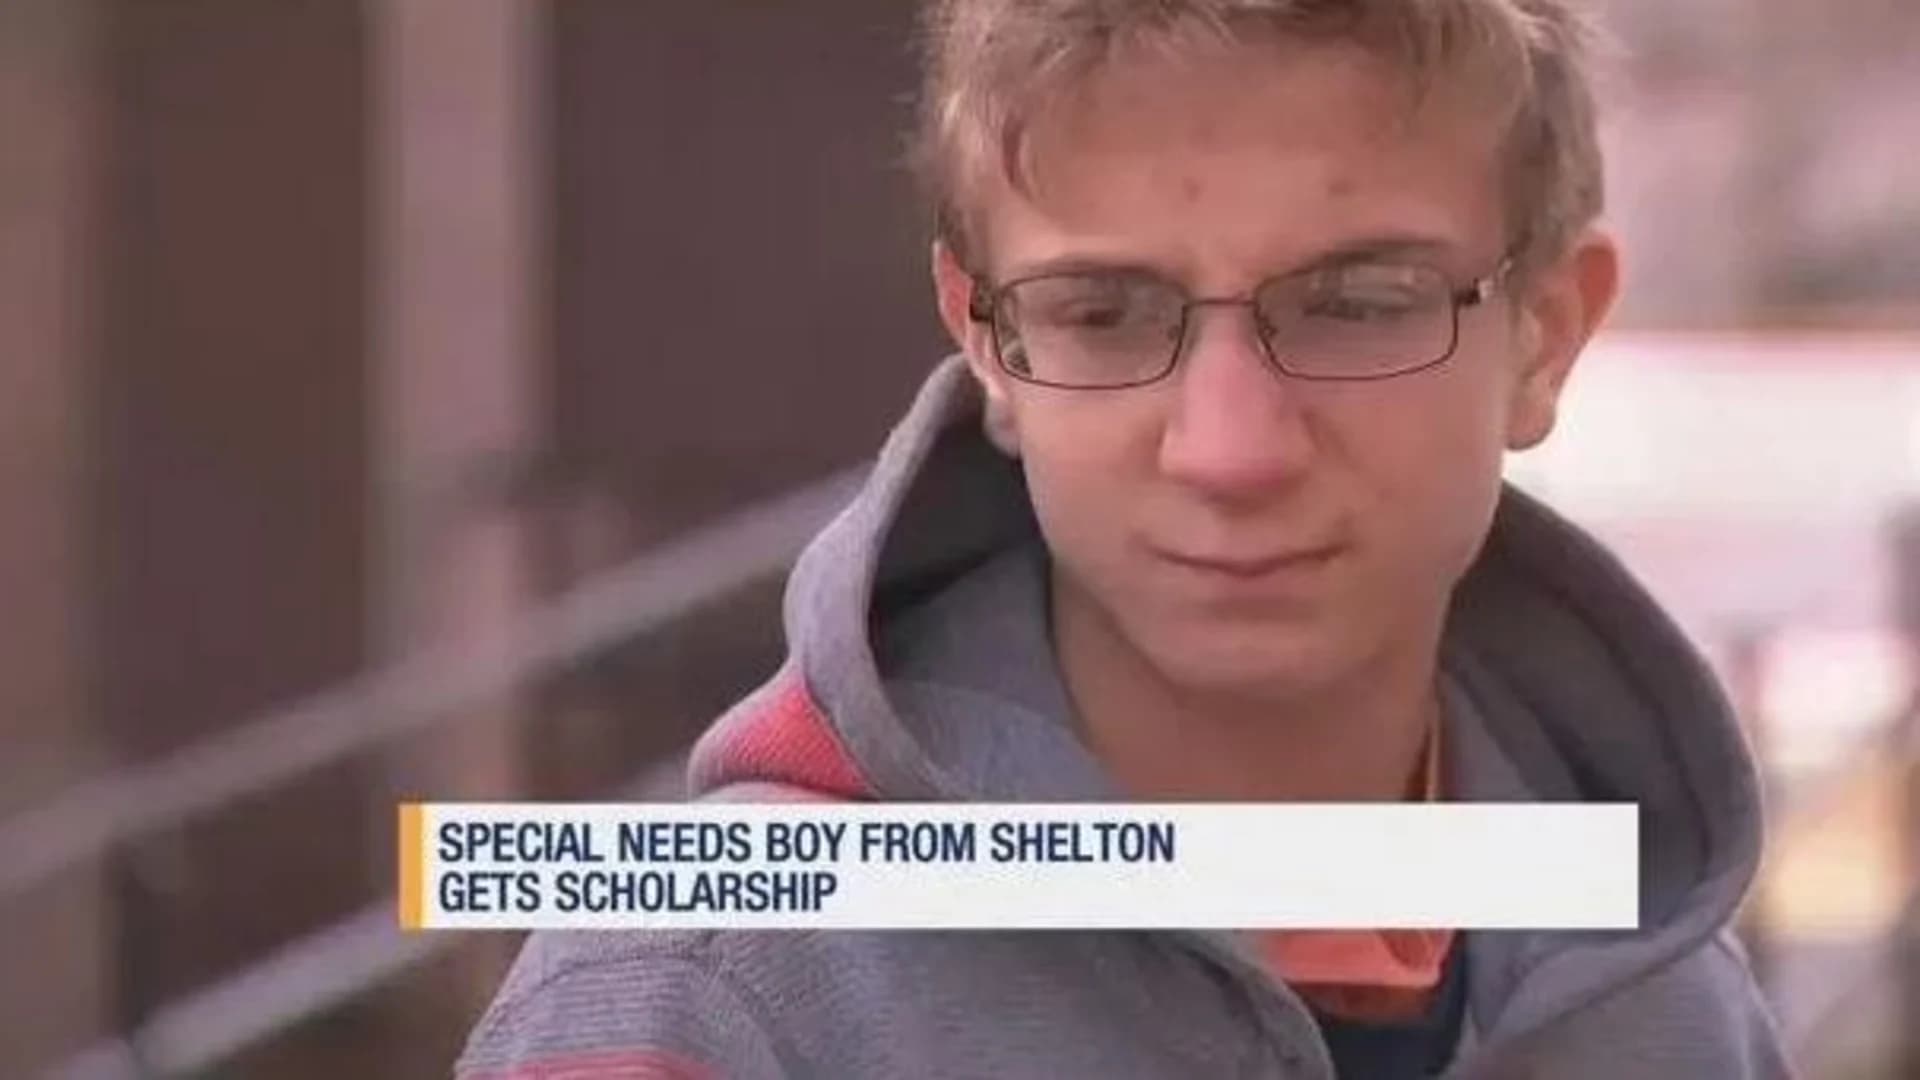 Shelton teen with special needs gets scholarship to school